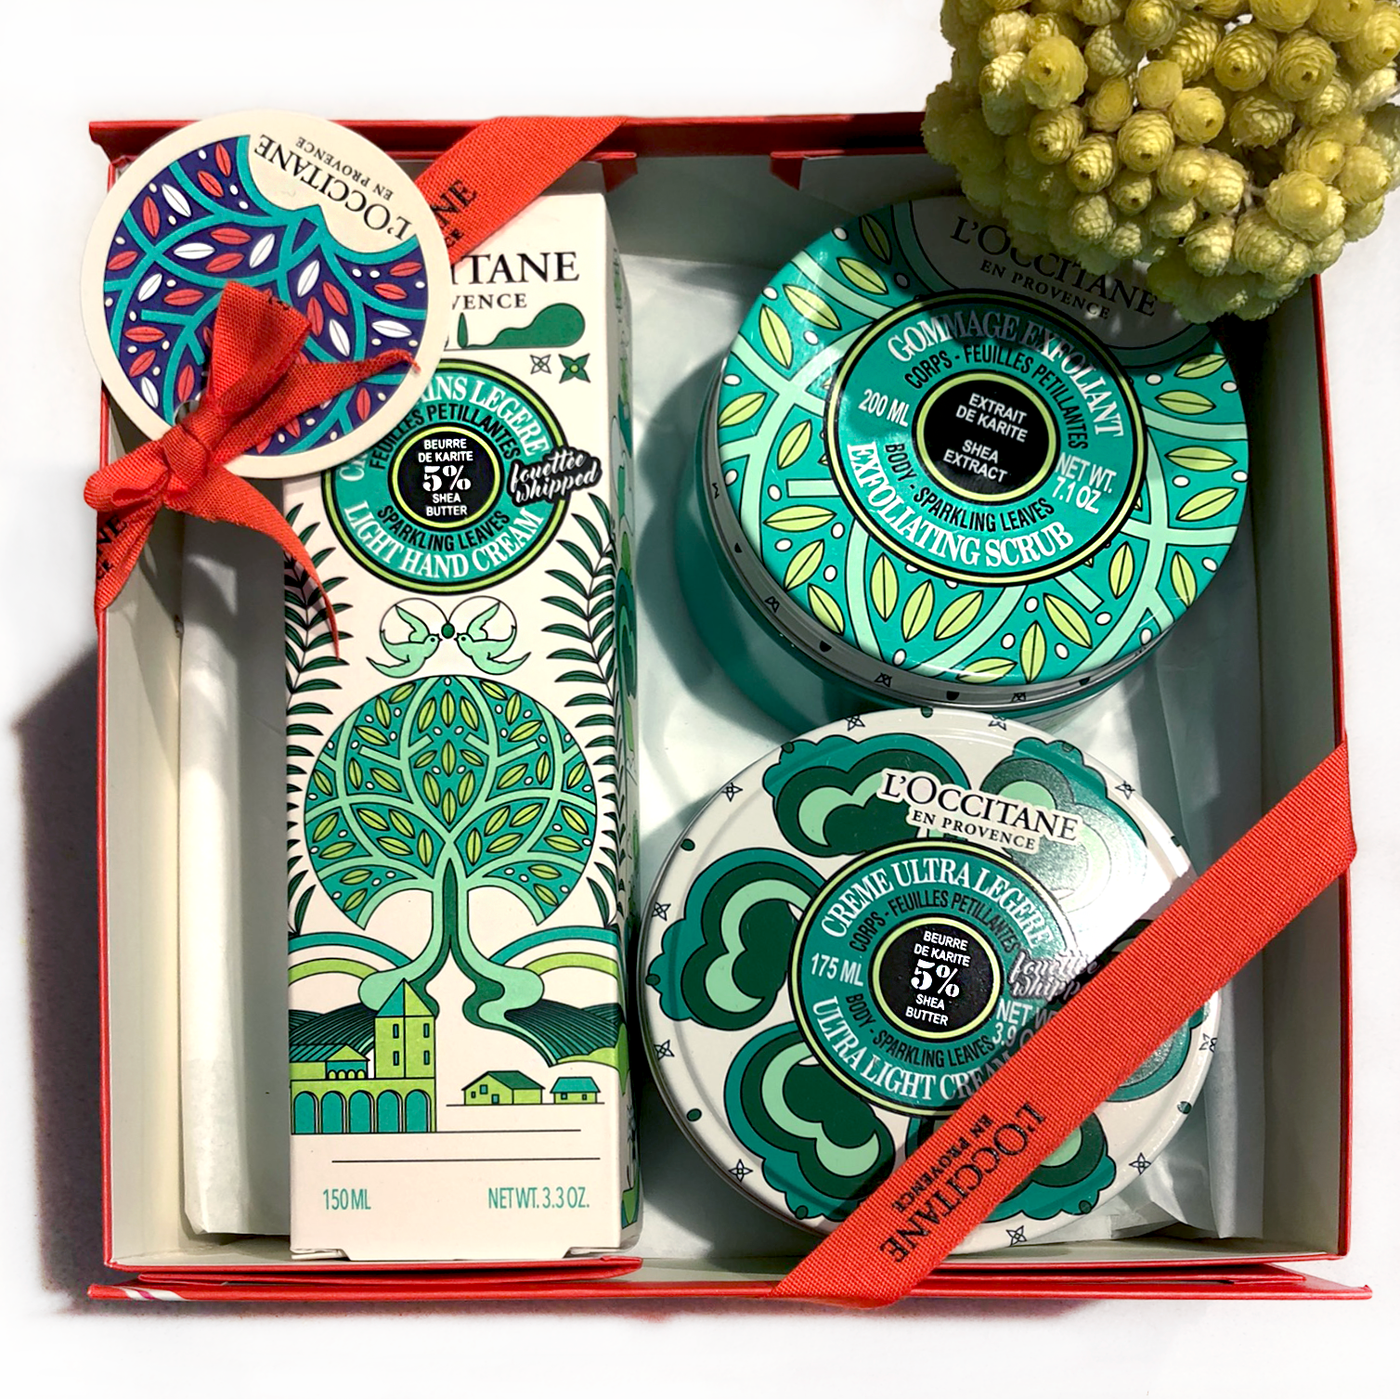 L_Occitane-Shea-Sparkling-Leaves-Limited-Edition-GiftSet-Dodomarket-delivery-Mauritius